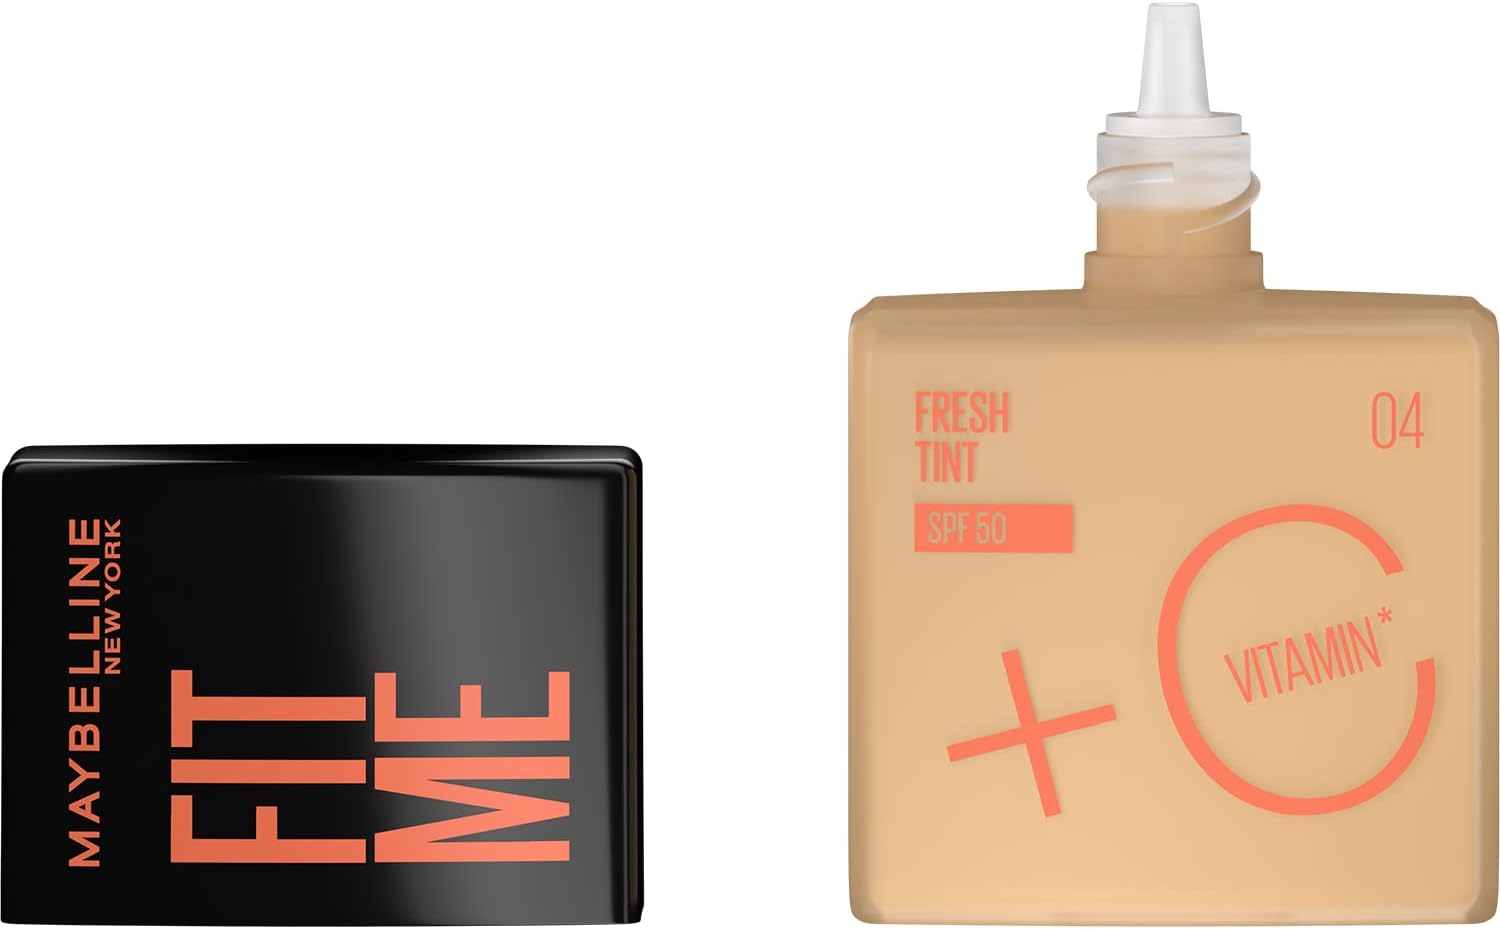 Maybelline New York, Fit Me Fresh Tint SPF 50 with Brightening Vitamin C